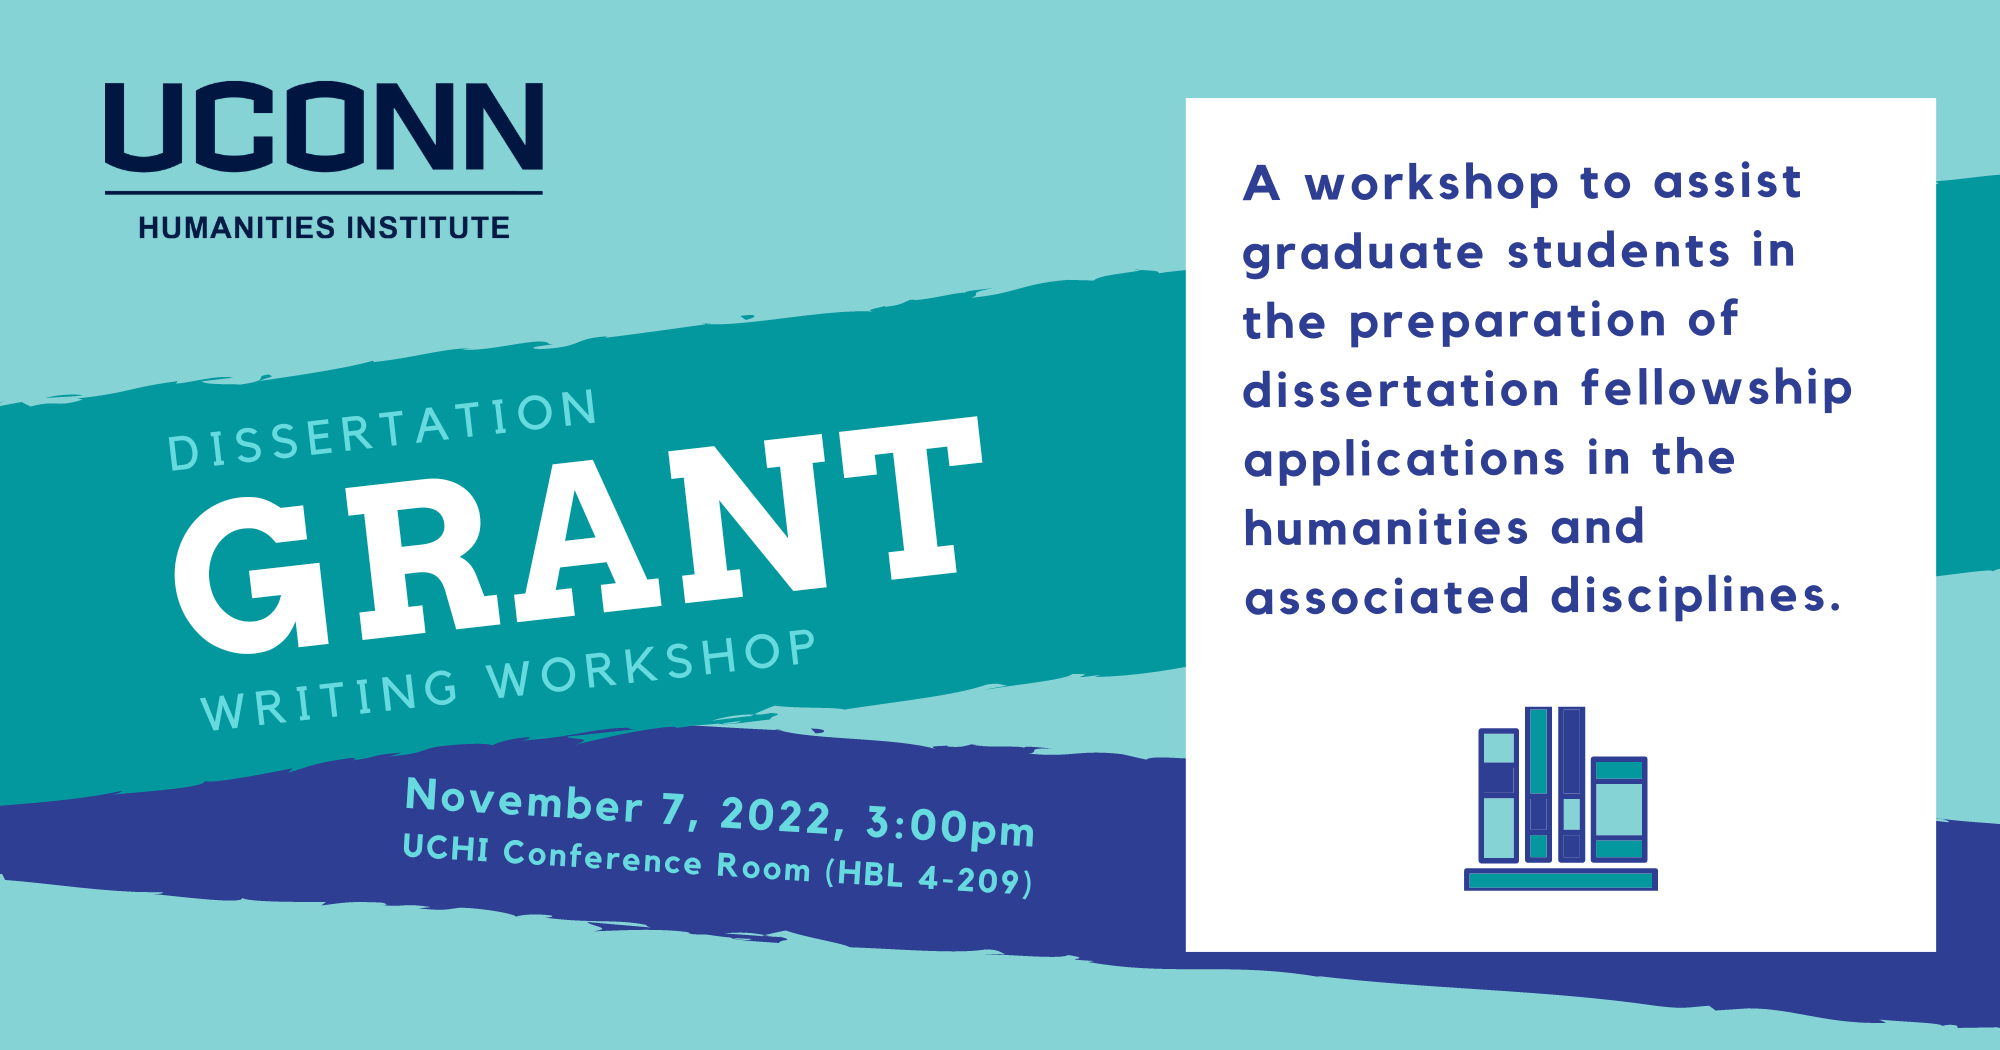 UConn Humanities Institute. Dissertation Grant writing workshop. November 7, 2022, 3:00pm. UCHI Conference Room (HBL 4-209). A workshop to assist graduate students in the preparation of dissertation fellowship applications in the humanities and associated disciplines.